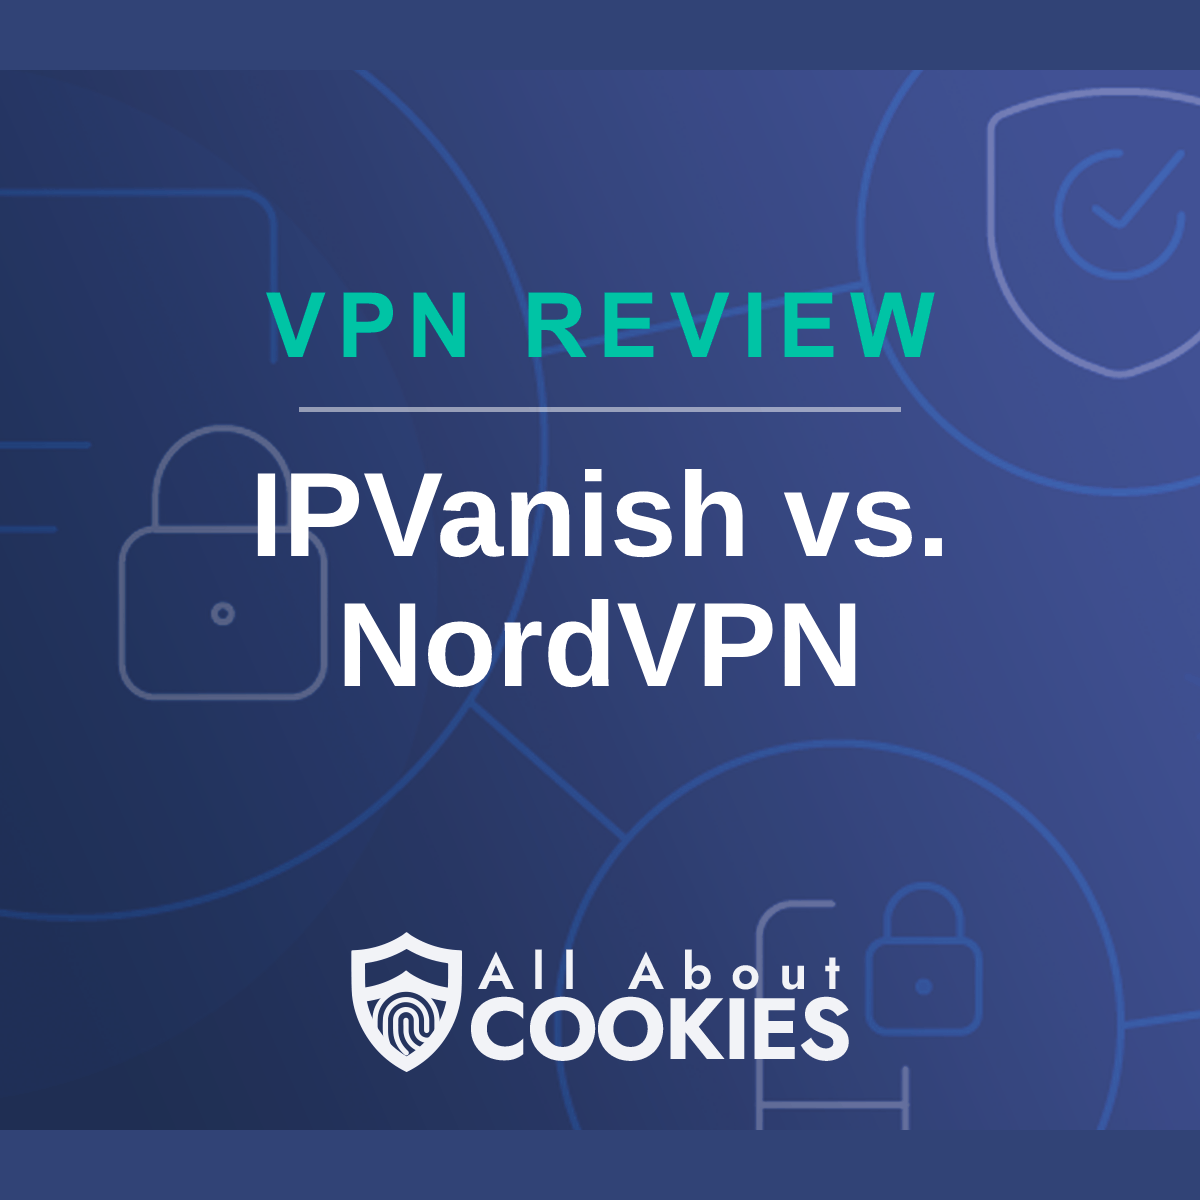 A blue background with images of locks and shields with the text &quot;IPVanish vs. NordVPN&quot; and the All About Cookies logo. 